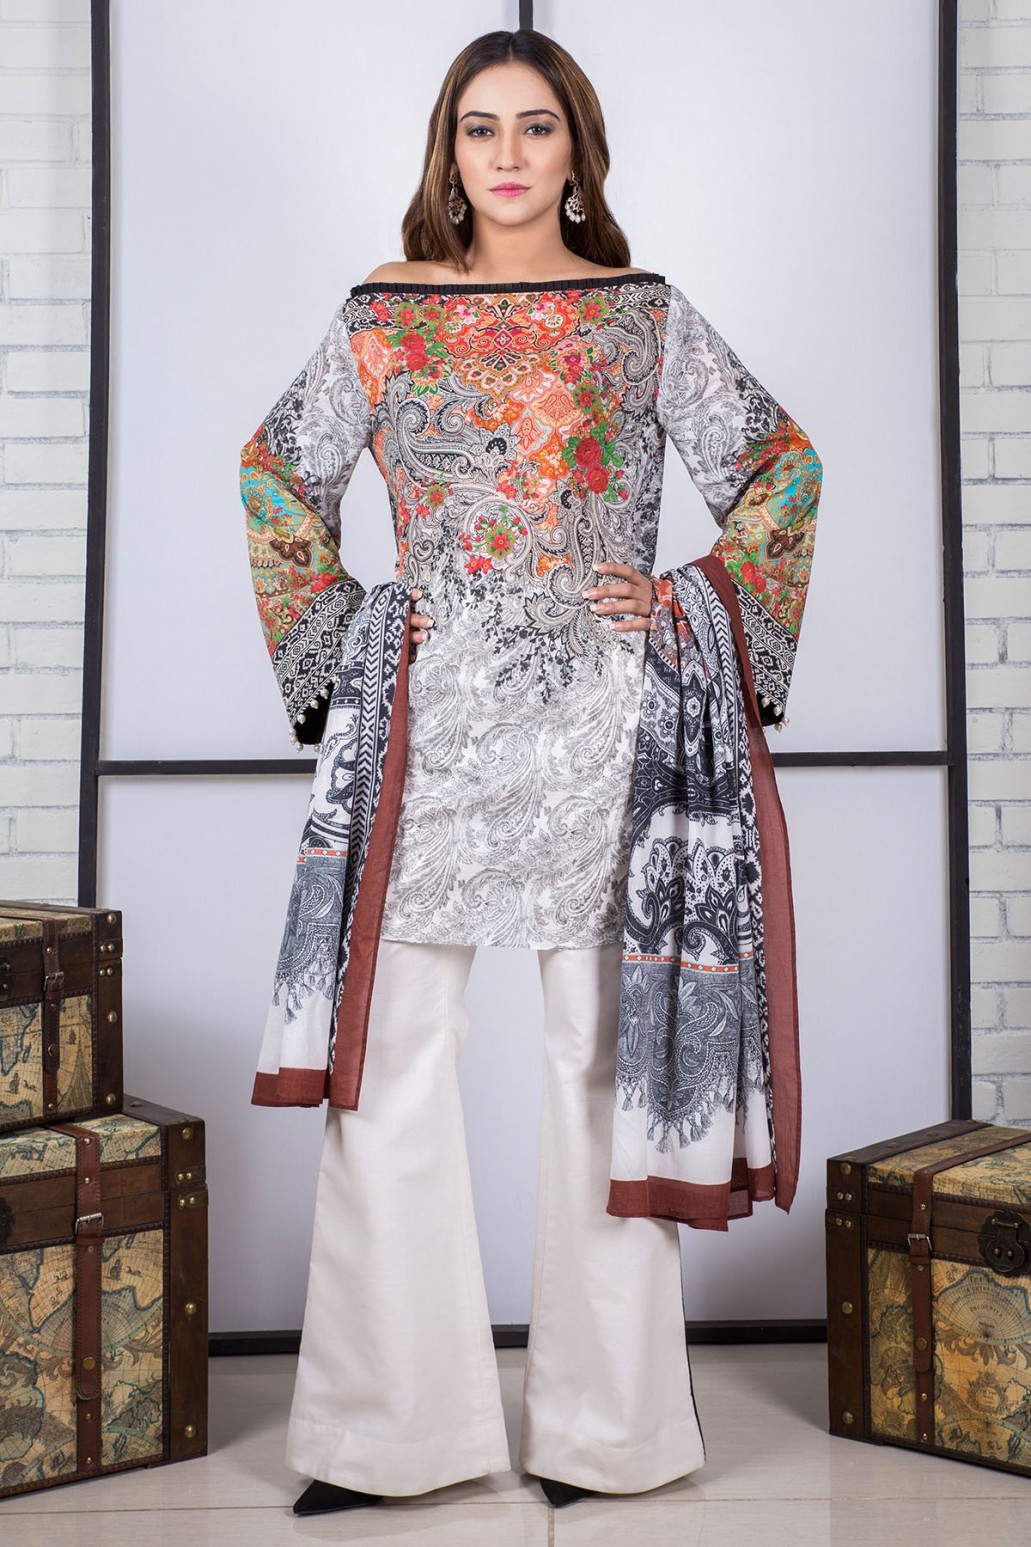 Girl In Prined Gray And White Kurti 1031x1547 